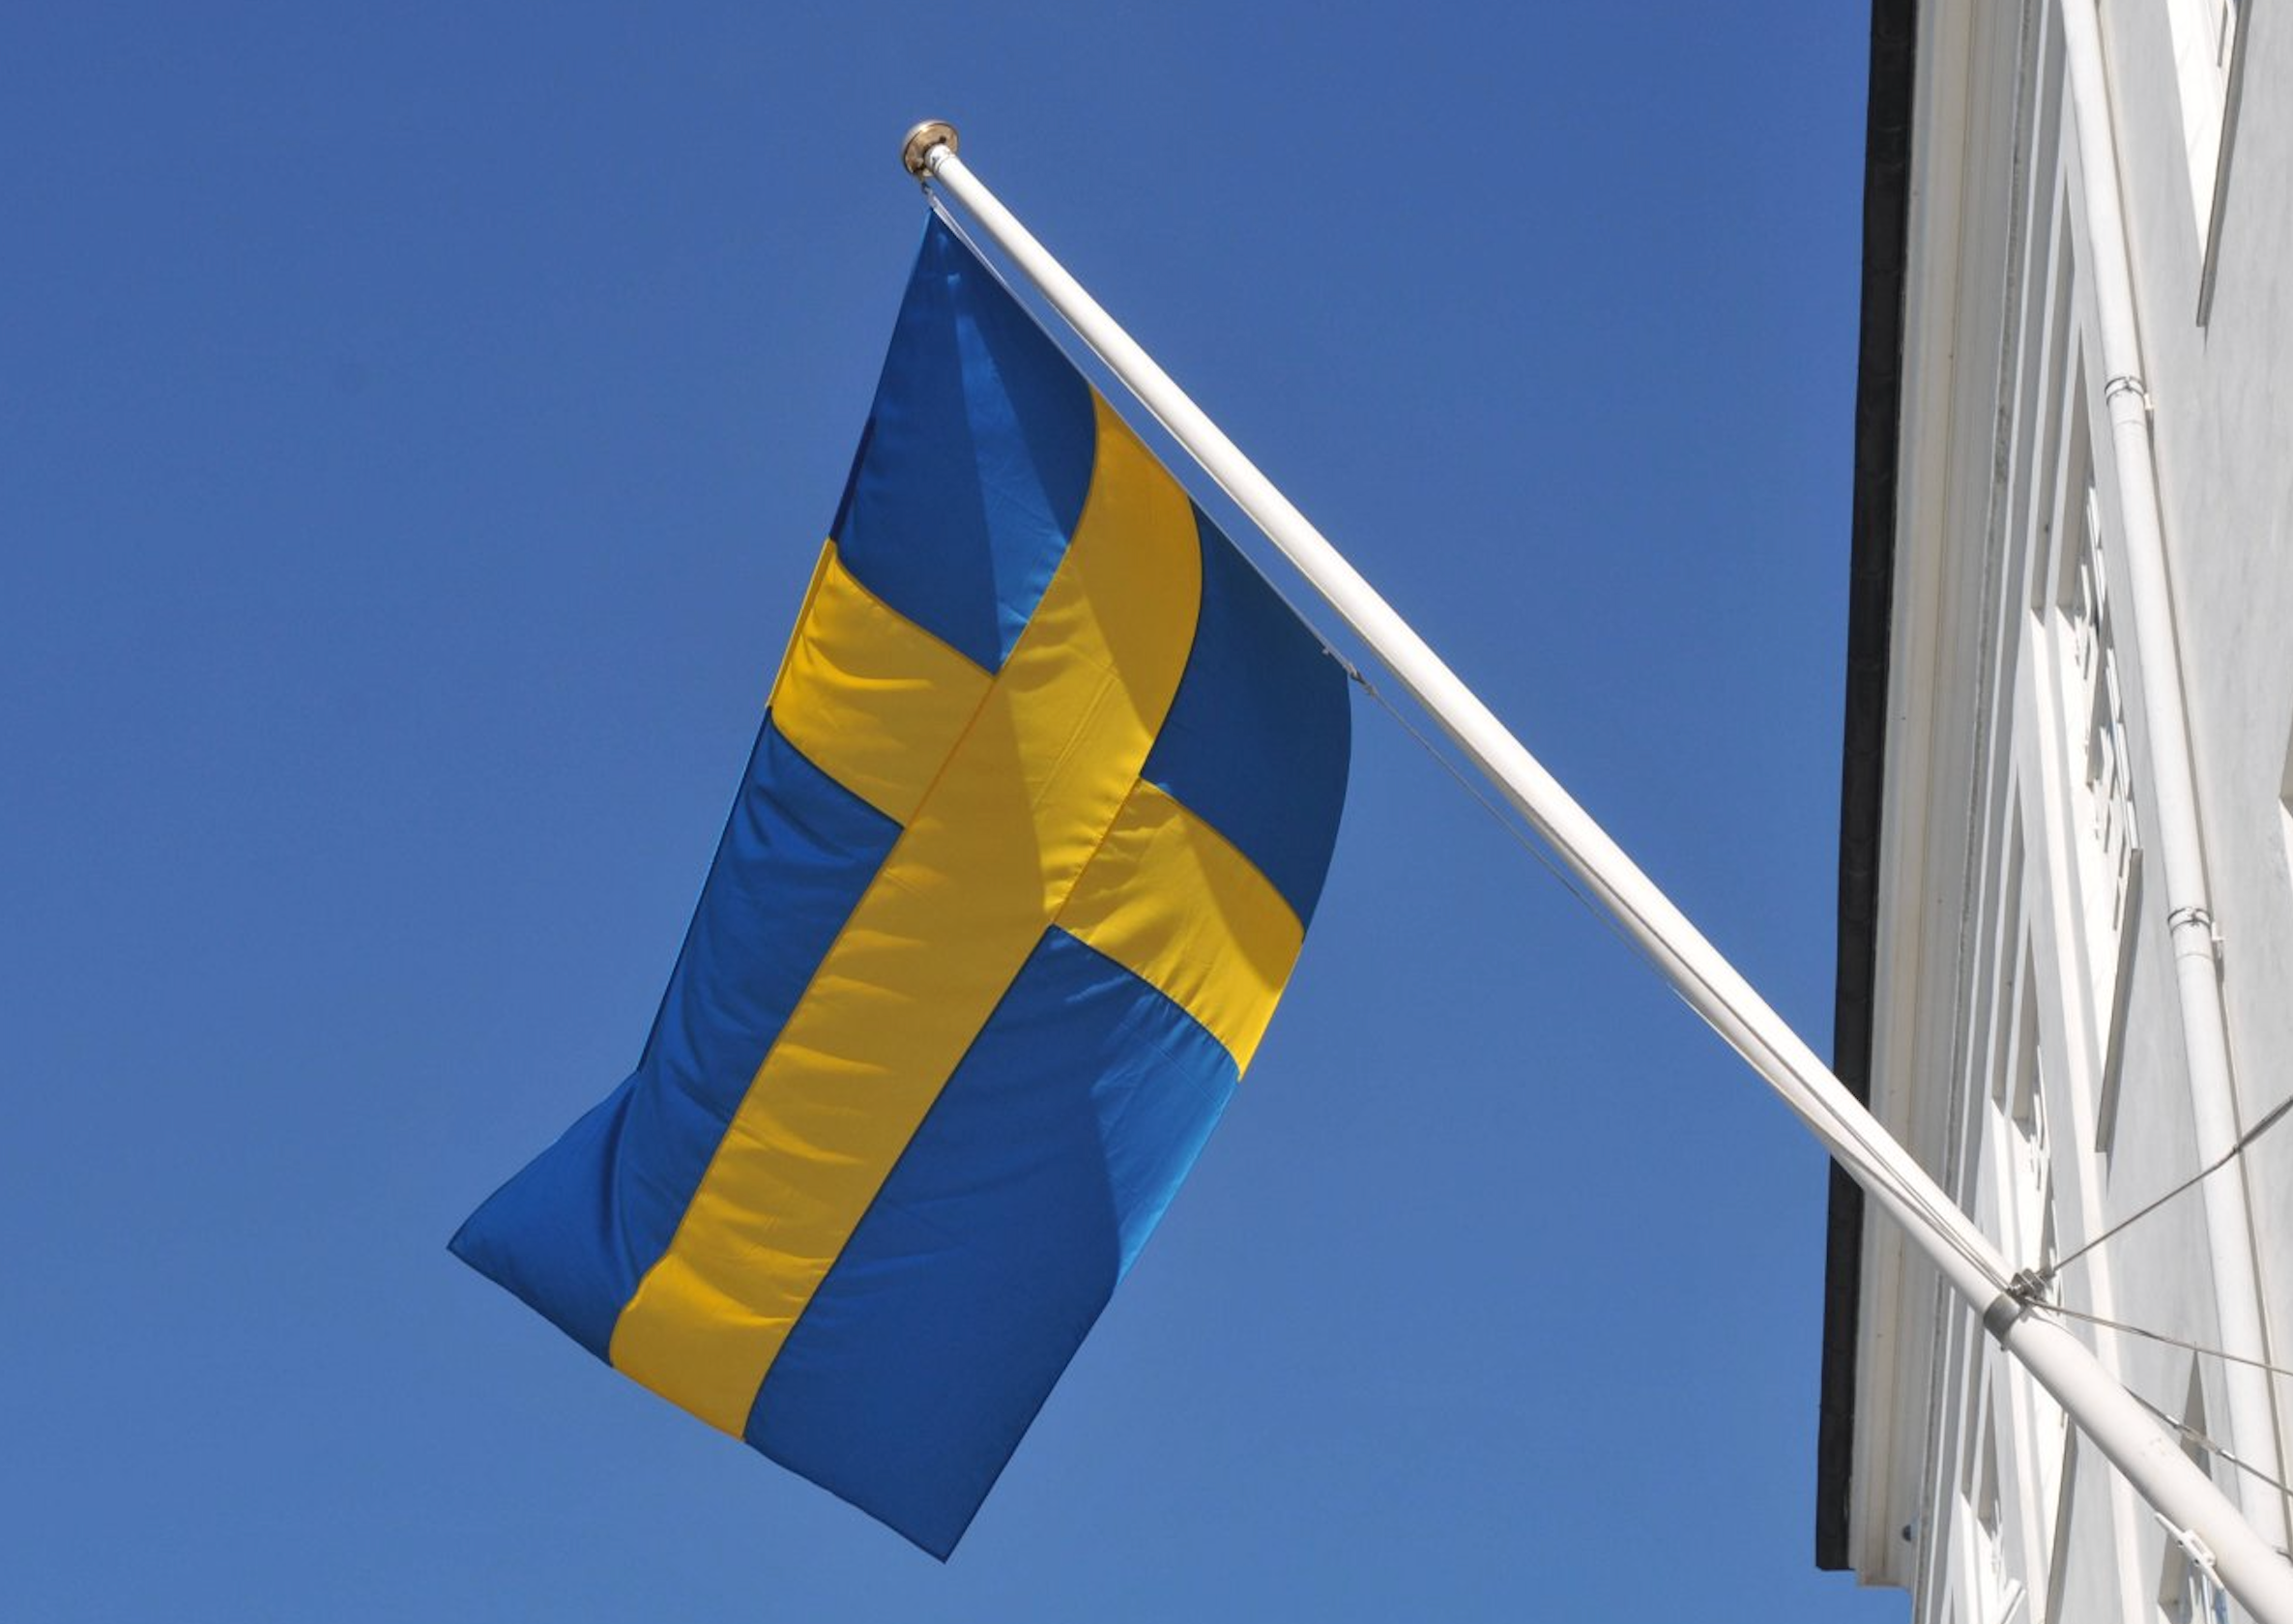 Sweden charges man with spying for Russia on Sweden, US